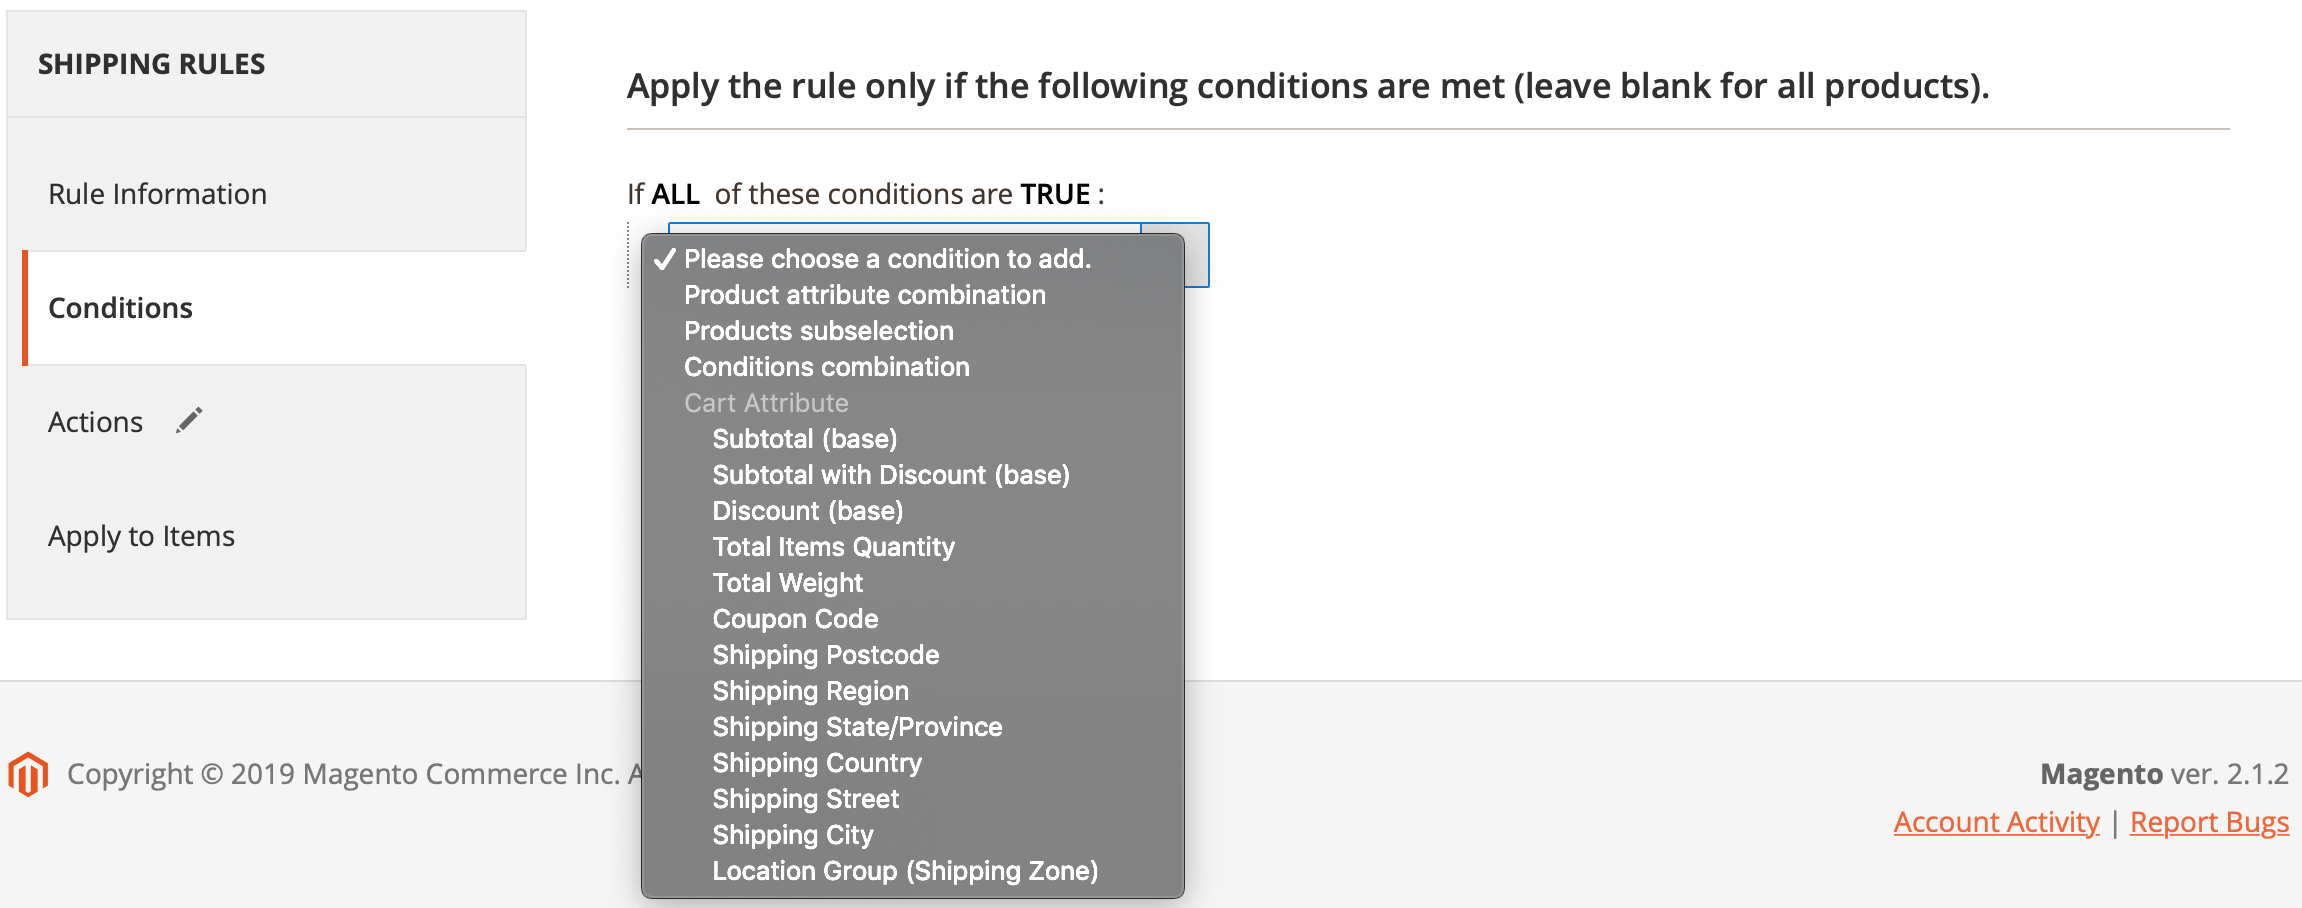 Mageworx Shipping Rules Conditions